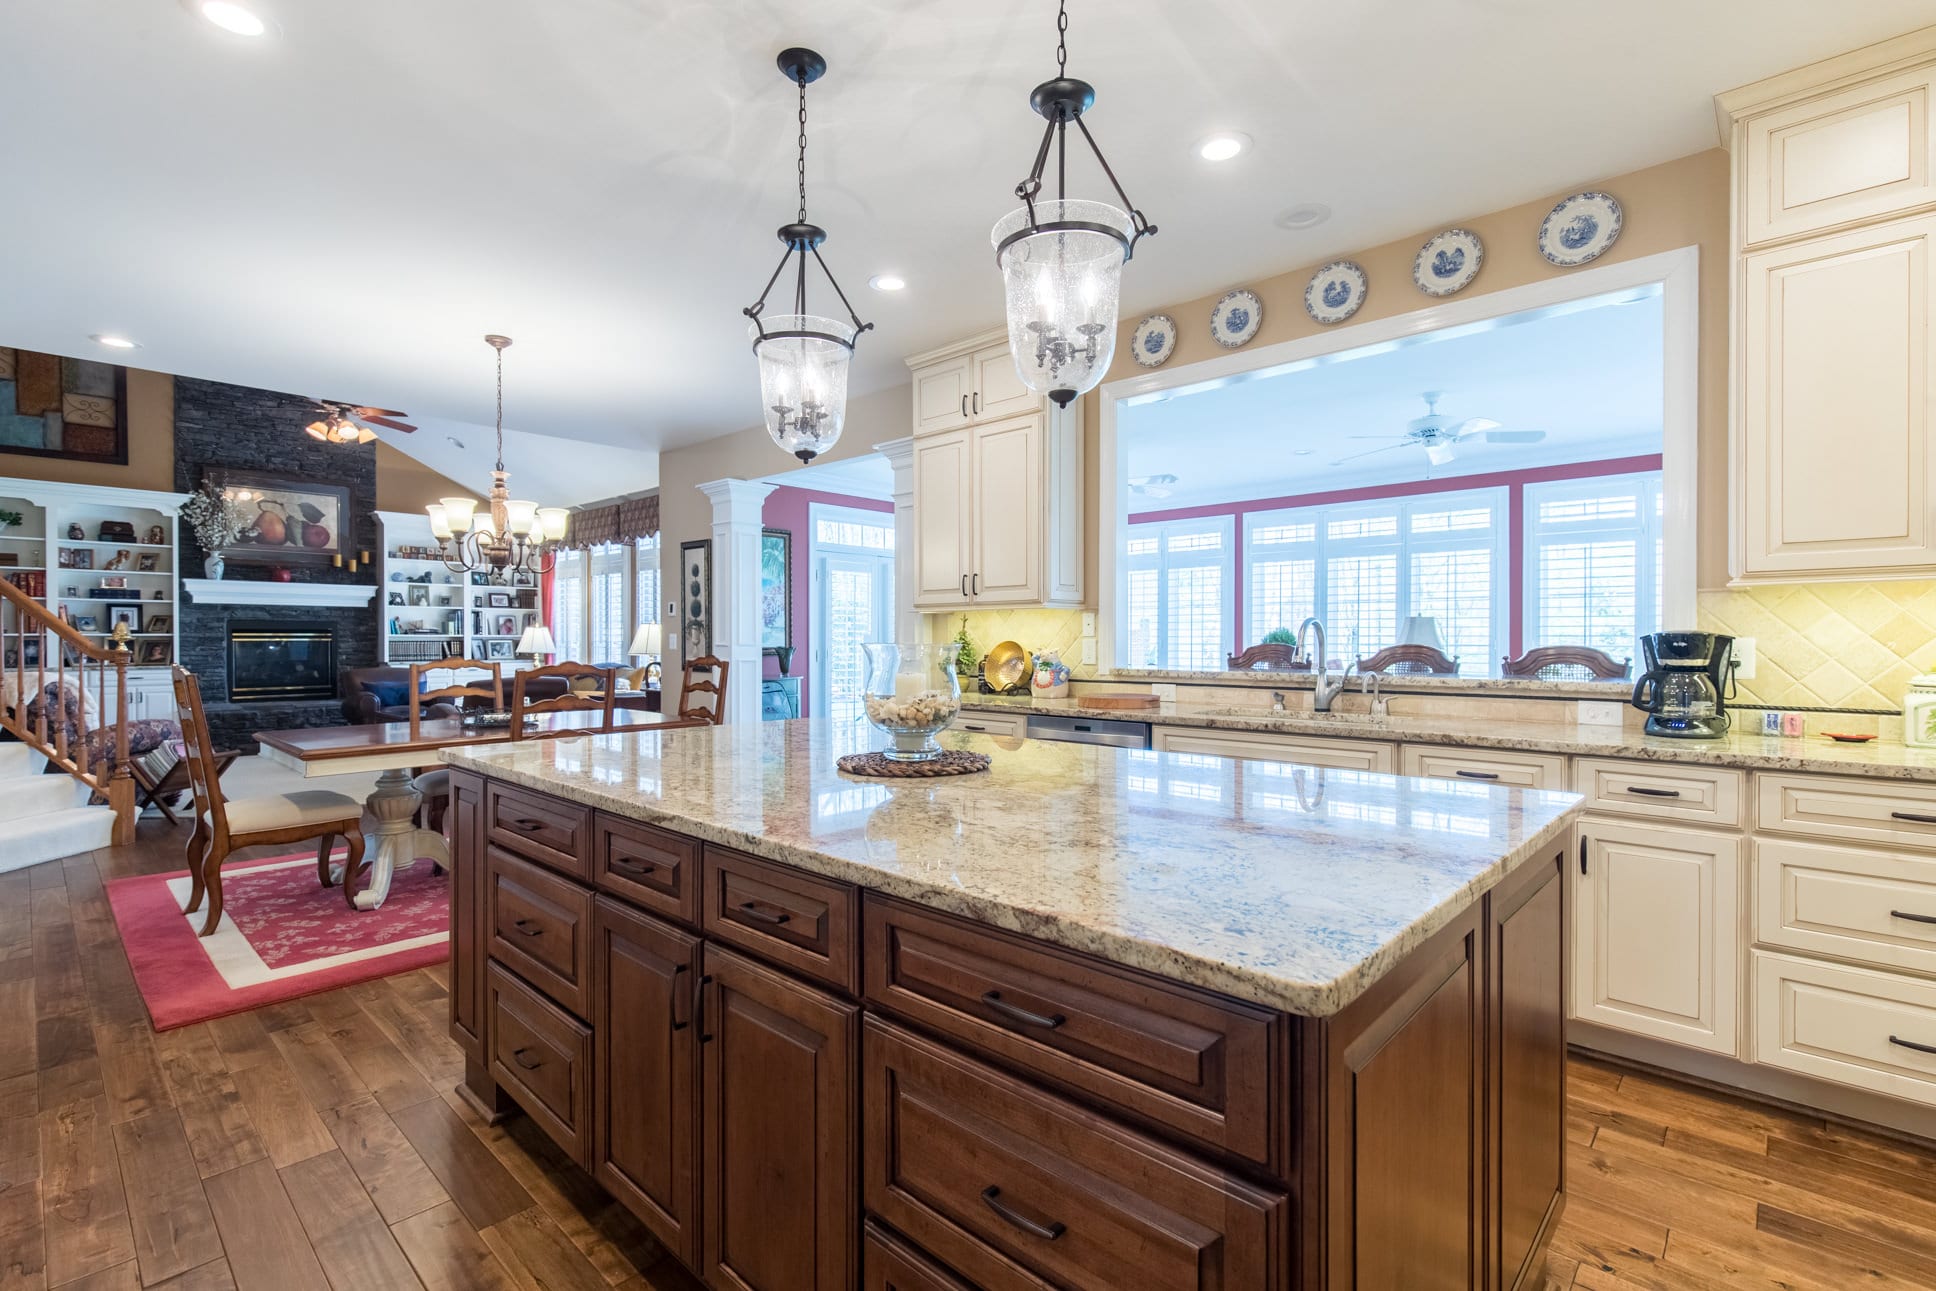 It is important to choose the right countertop for the kitchen, because the surface has to withstand many loads for a long time. That is why we offer countertops in a variety of materials and colors.